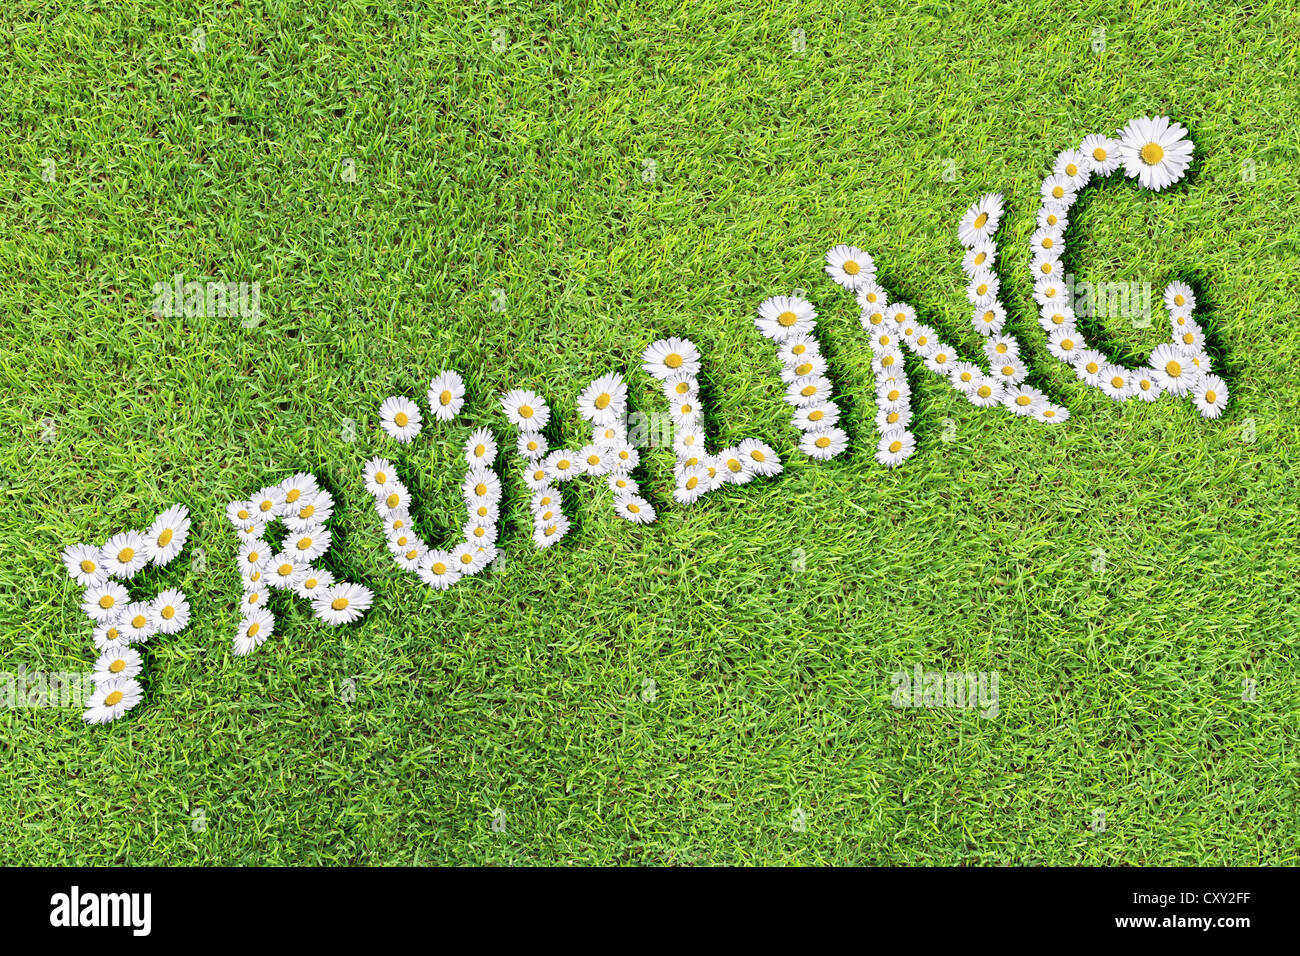 Daisies, grass, lettering 'Fruehling', German for 'Spring' Stock Photo